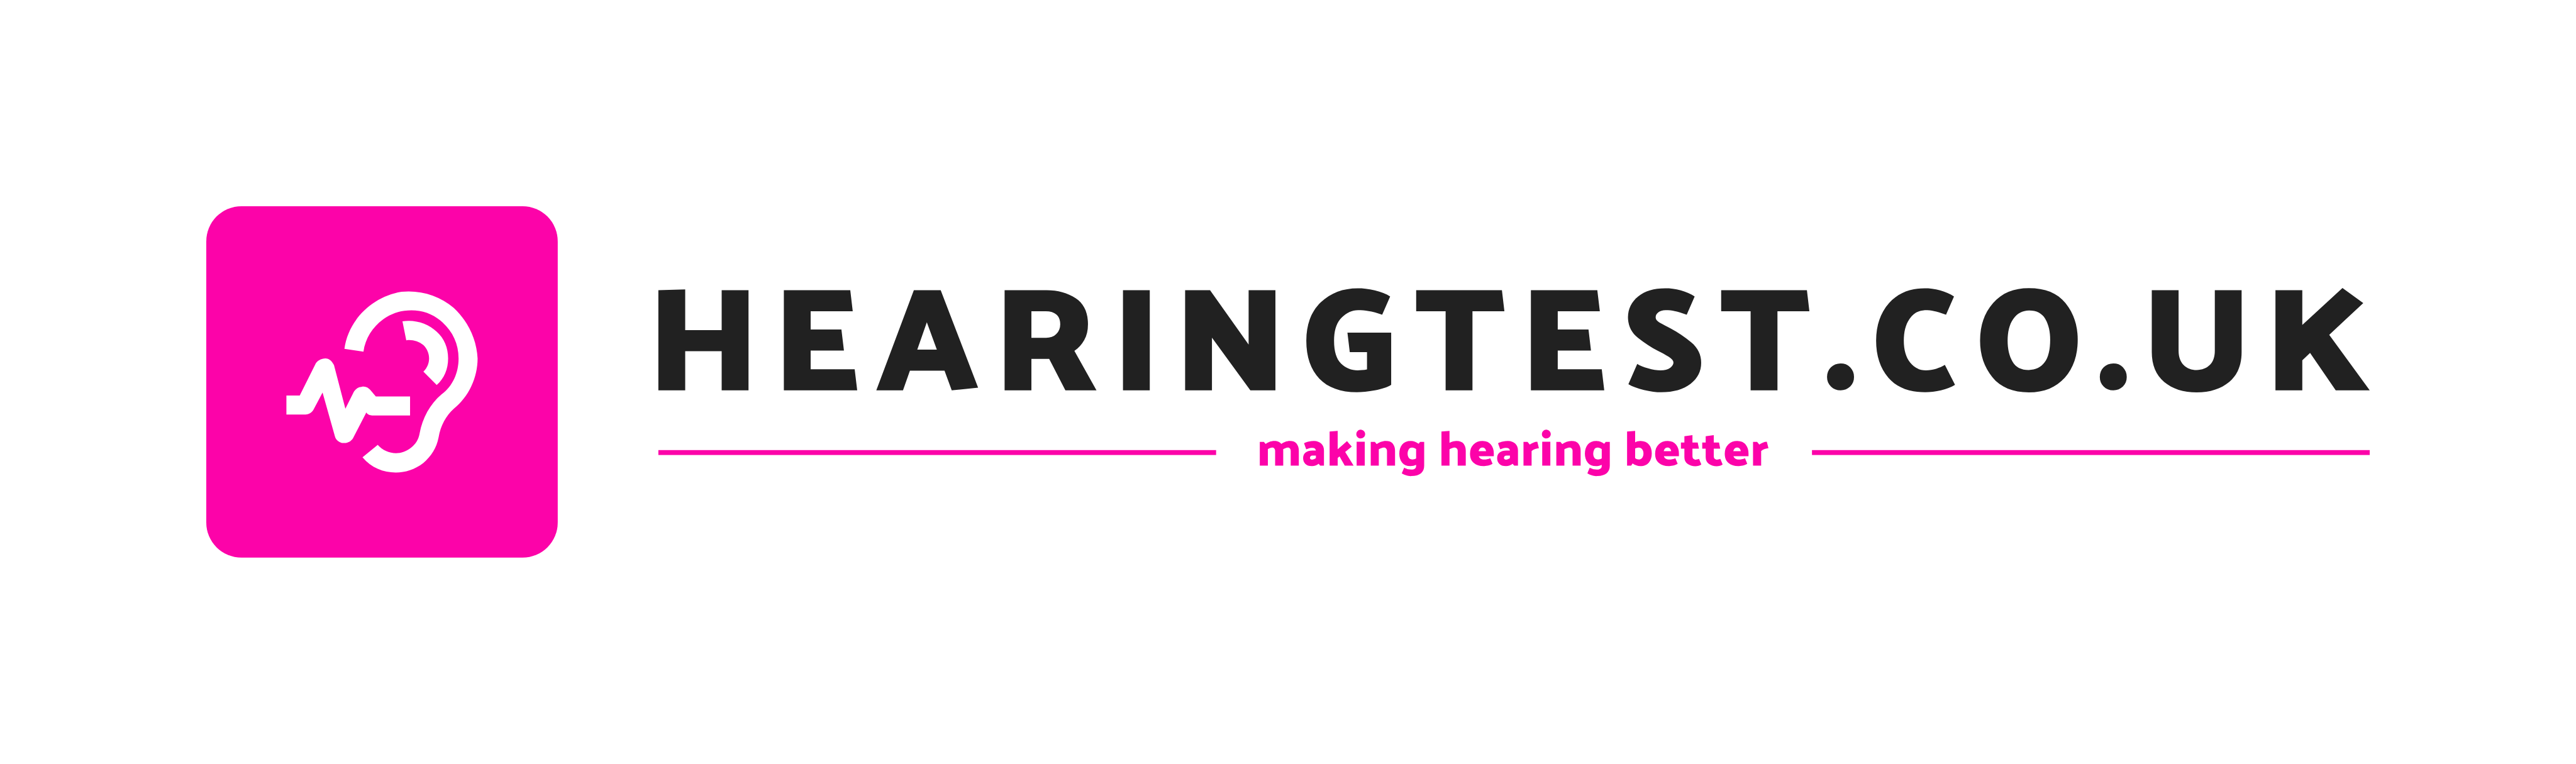 Free Hearing Test for Adults in Luton | Hearingtest.co.uk